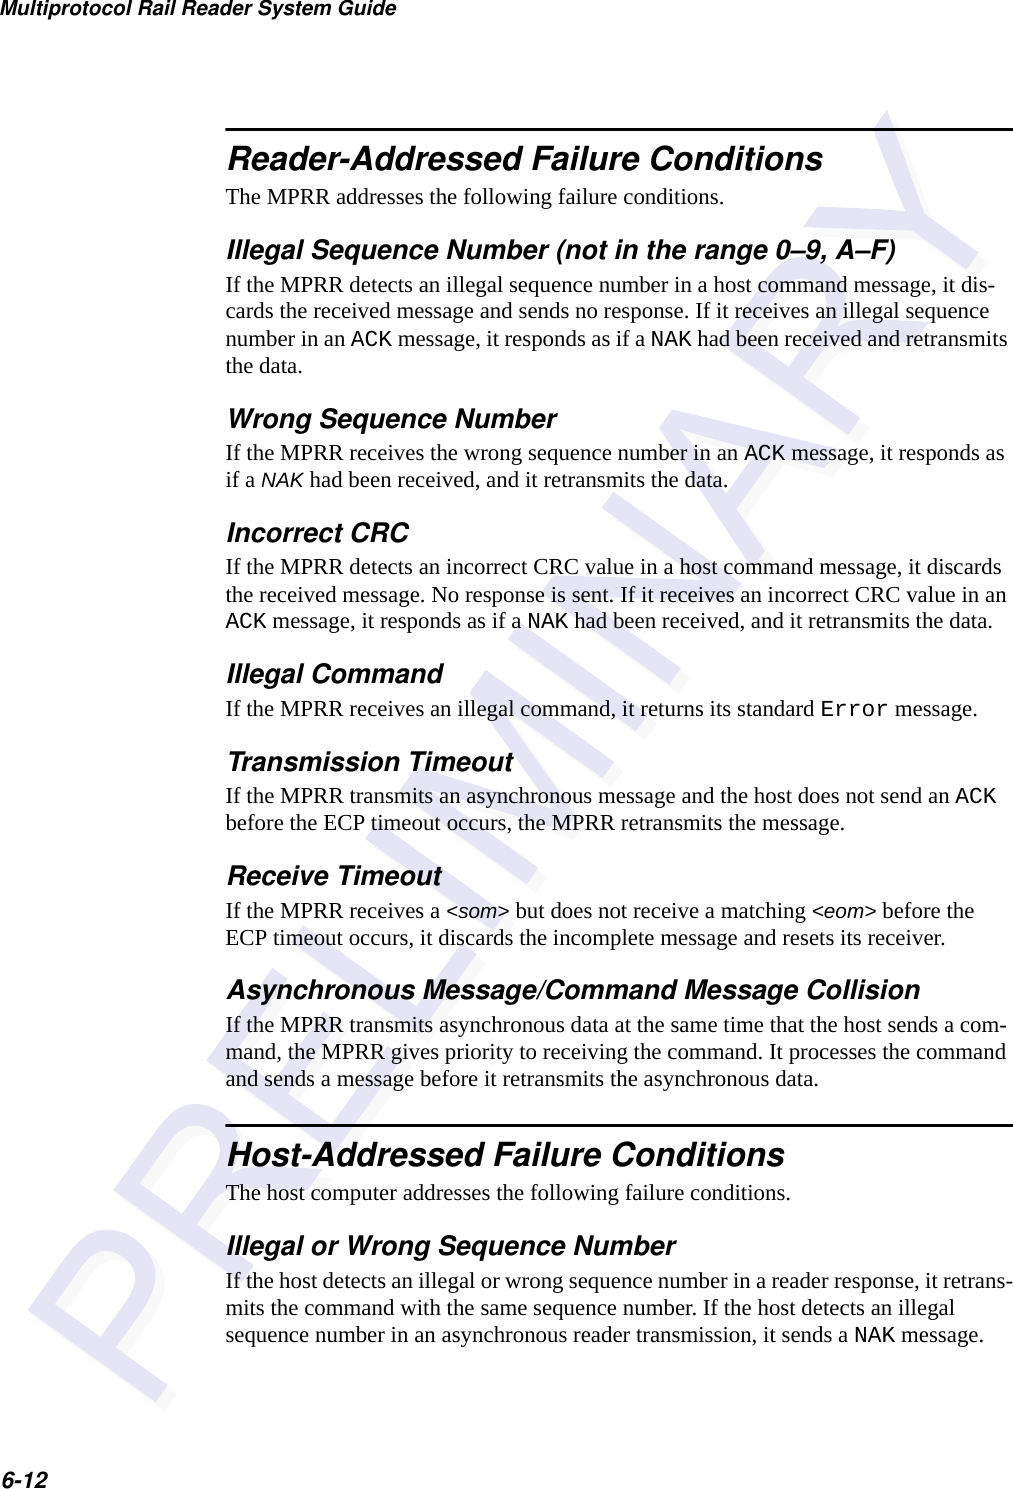 Multiprotocol Rail Reader System Guide6-12Reader-Addressed Failure ConditionsThe MPRR addresses the following failure conditions.Illegal Sequence Number (not in the range 0–9, A–F)If the MPRR detects an illegal sequence number in a host command message, it dis-cards the received message and sends no response. If it receives an illegal sequence number in an ACK message, it responds as if a NAK had been received and retransmits the data.Wrong Sequence NumberIf the MPRR receives the wrong sequence number in an ACK message, it responds as if a NAK had been received, and it retransmits the data.Incorrect CRCIf the MPRR detects an incorrect CRC value in a host command message, it discards the received message. No response is sent. If it receives an incorrect CRC value in an ACK message, it responds as if a NAK had been received, and it retransmits the data.Illegal CommandIf the MPRR receives an illegal command, it returns its standard Error message.Transmission TimeoutIf the MPRR transmits an asynchronous message and the host does not send an ACK before the ECP timeout occurs, the MPRR retransmits the message.Receive TimeoutIf the MPRR receives a &lt;som&gt; but does not receive a matching &lt;eom&gt; before the ECP timeout occurs, it discards the incomplete message and resets its receiver.Asynchronous Message/Command Message CollisionIf the MPRR transmits asynchronous data at the same time that the host sends a com-mand, the MPRR gives priority to receiving the command. It processes the command and sends a message before it retransmits the asynchronous data.Host-Addressed Failure ConditionsThe host computer addresses the following failure conditions.Illegal or Wrong Sequence NumberIf the host detects an illegal or wrong sequence number in a reader response, it retrans-mits the command with the same sequence number. If the host detects an illegal sequence number in an asynchronous reader transmission, it sends a NAK message.